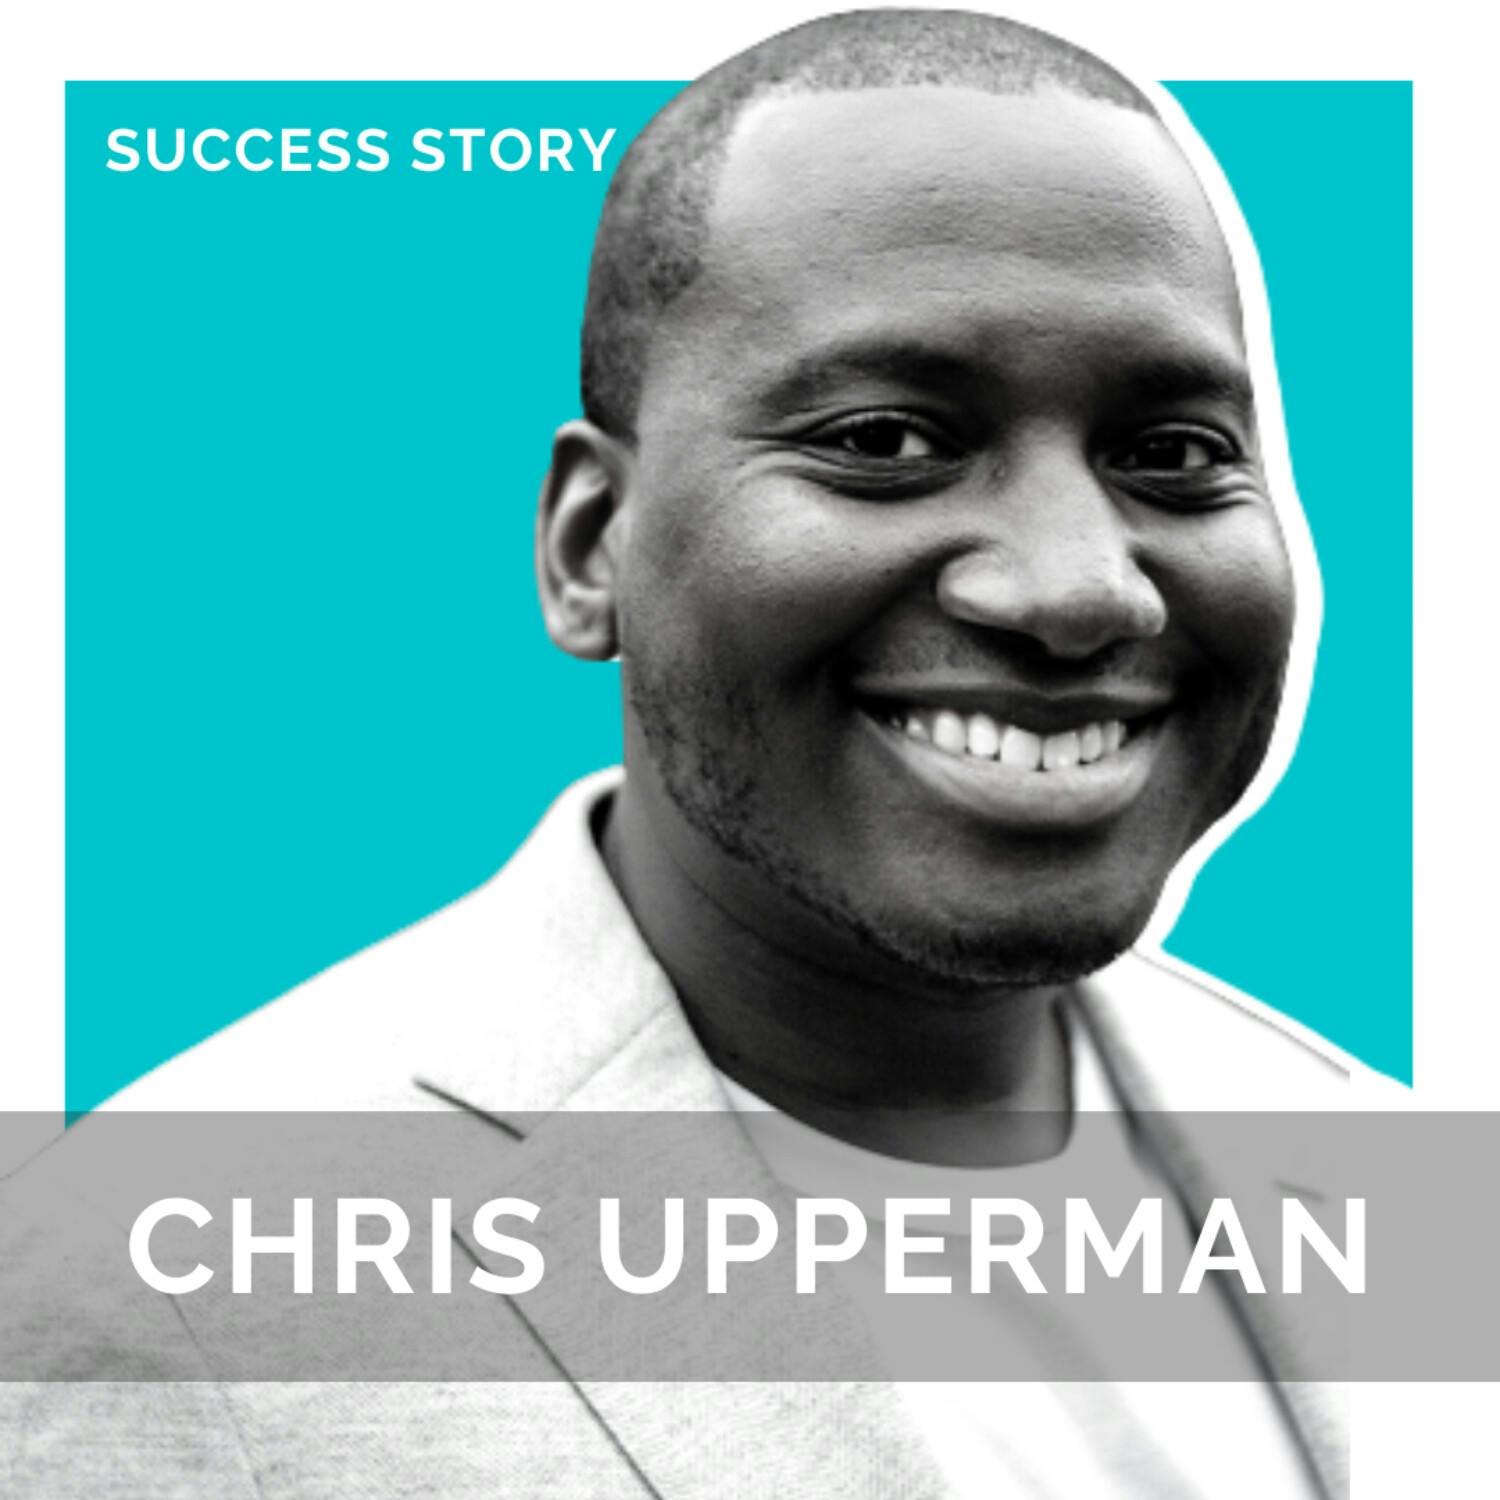 Chris Upperman, Manager of Governance & Strategic Initiatives for Facebook | From The White House Mail Room To Changing The World At Facebook